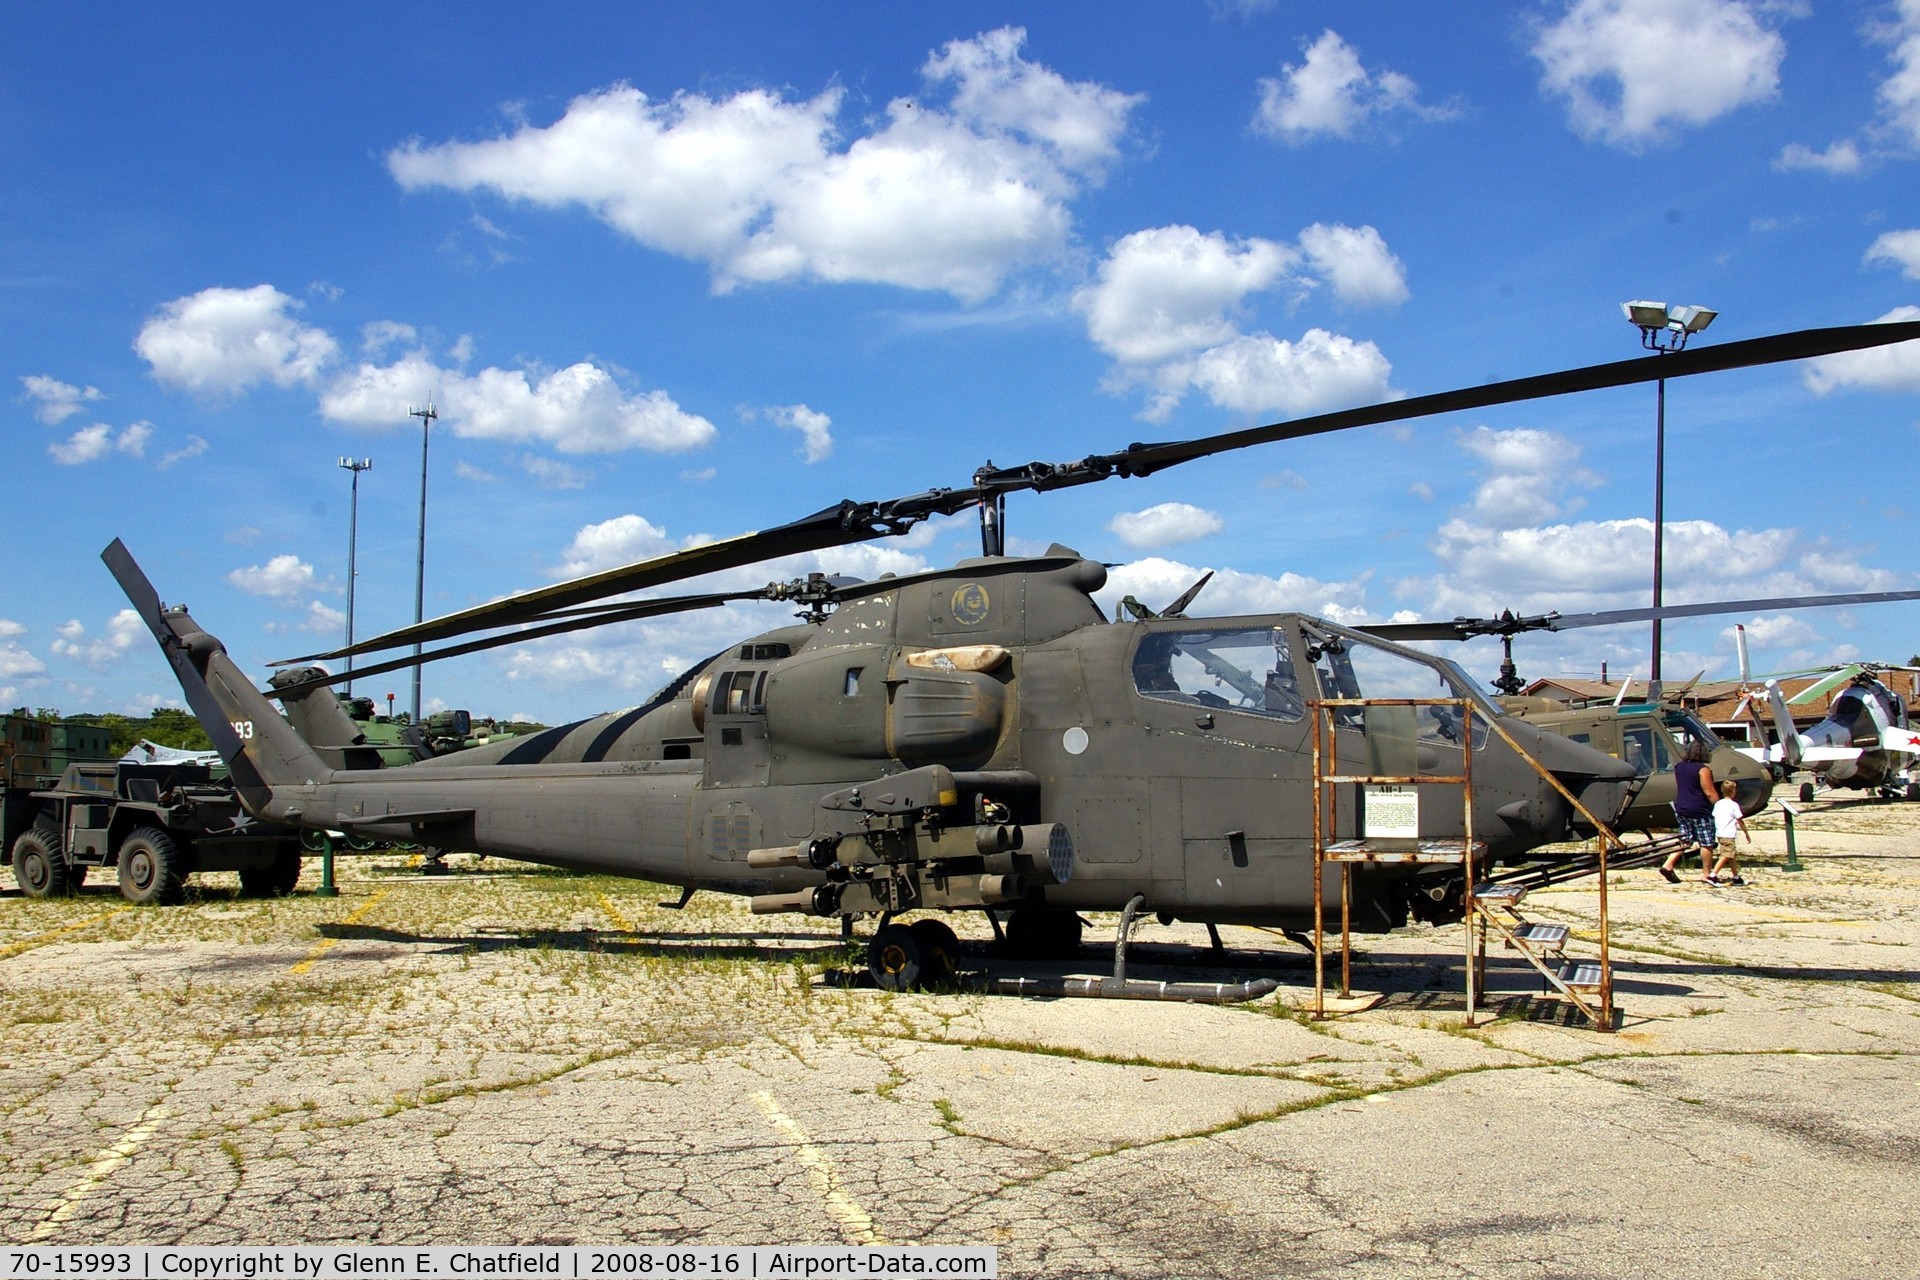 70-15993, 1970 Bell AH-1F Cobra C/N 20937, At the Russell Military Museum, Russell, IL